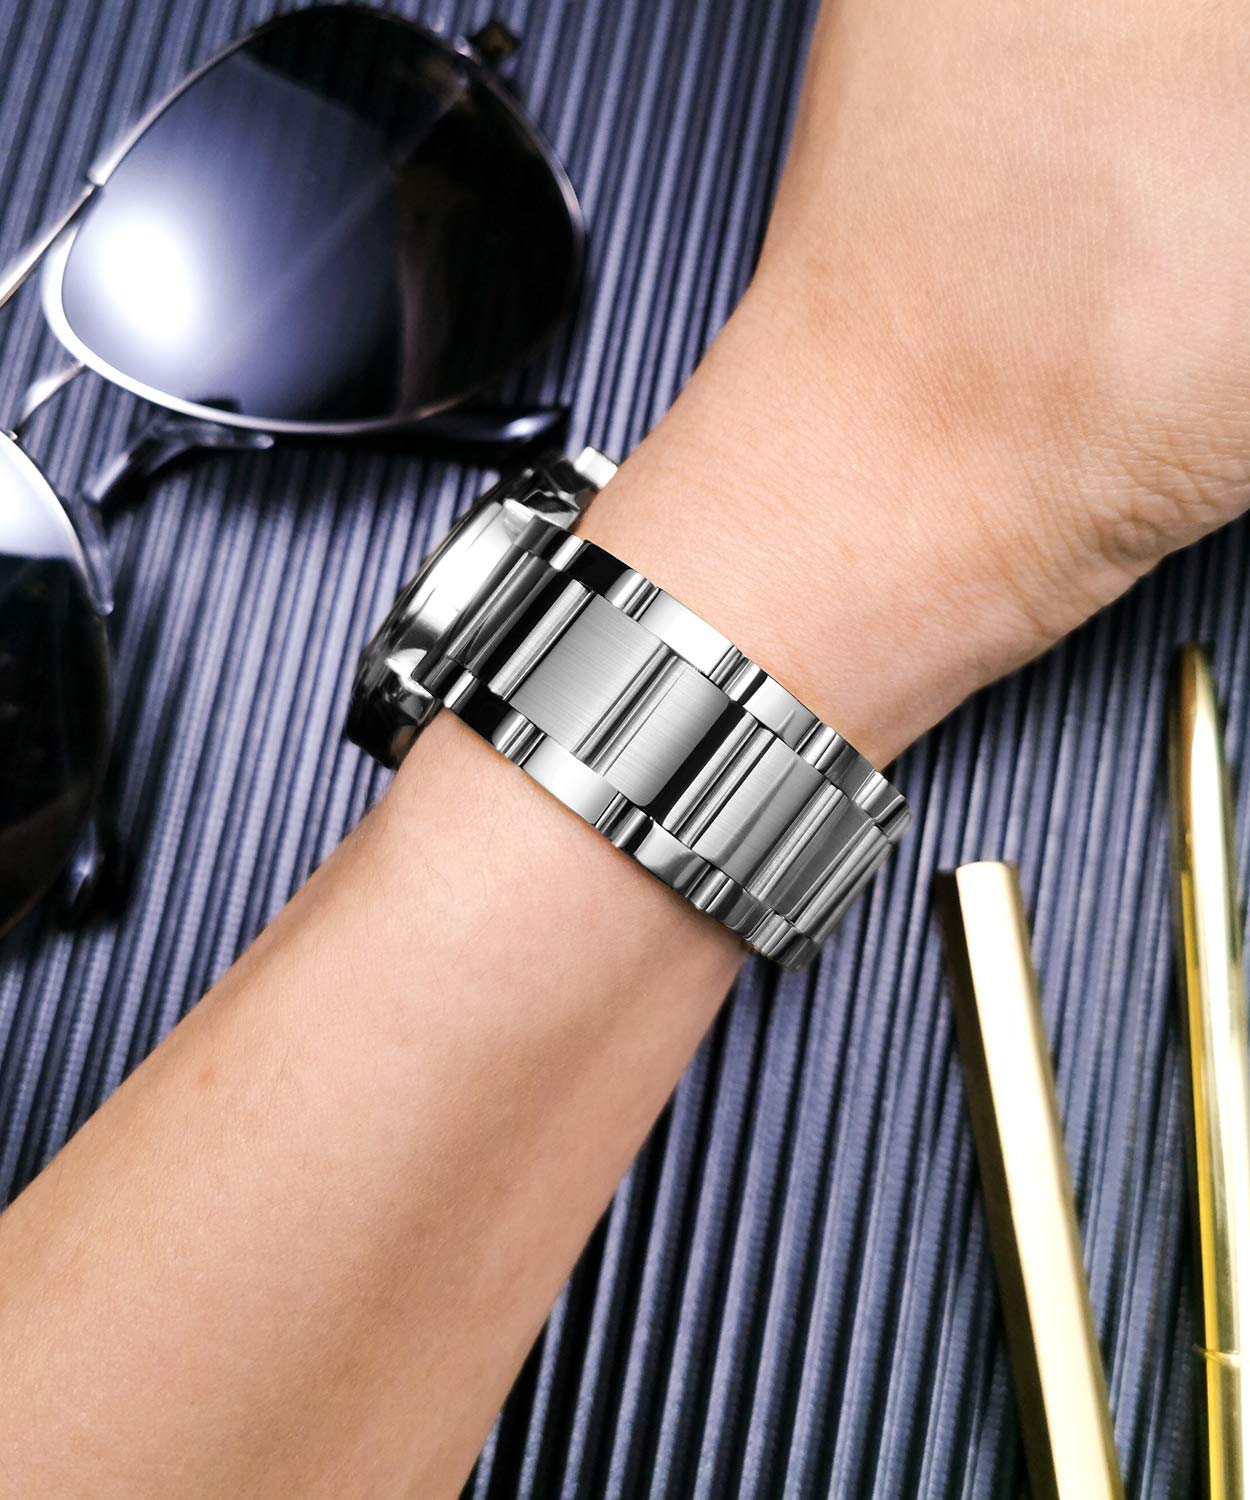 BINLUN Thick Stainless Steel Watch Band Metal Heavy Watch Bracelets Polished Matte Brushed Finish Watch Strap Replacement for Men Women 16mm/18mm/20mm/21mm/22mm/23mm/24mm/26mm